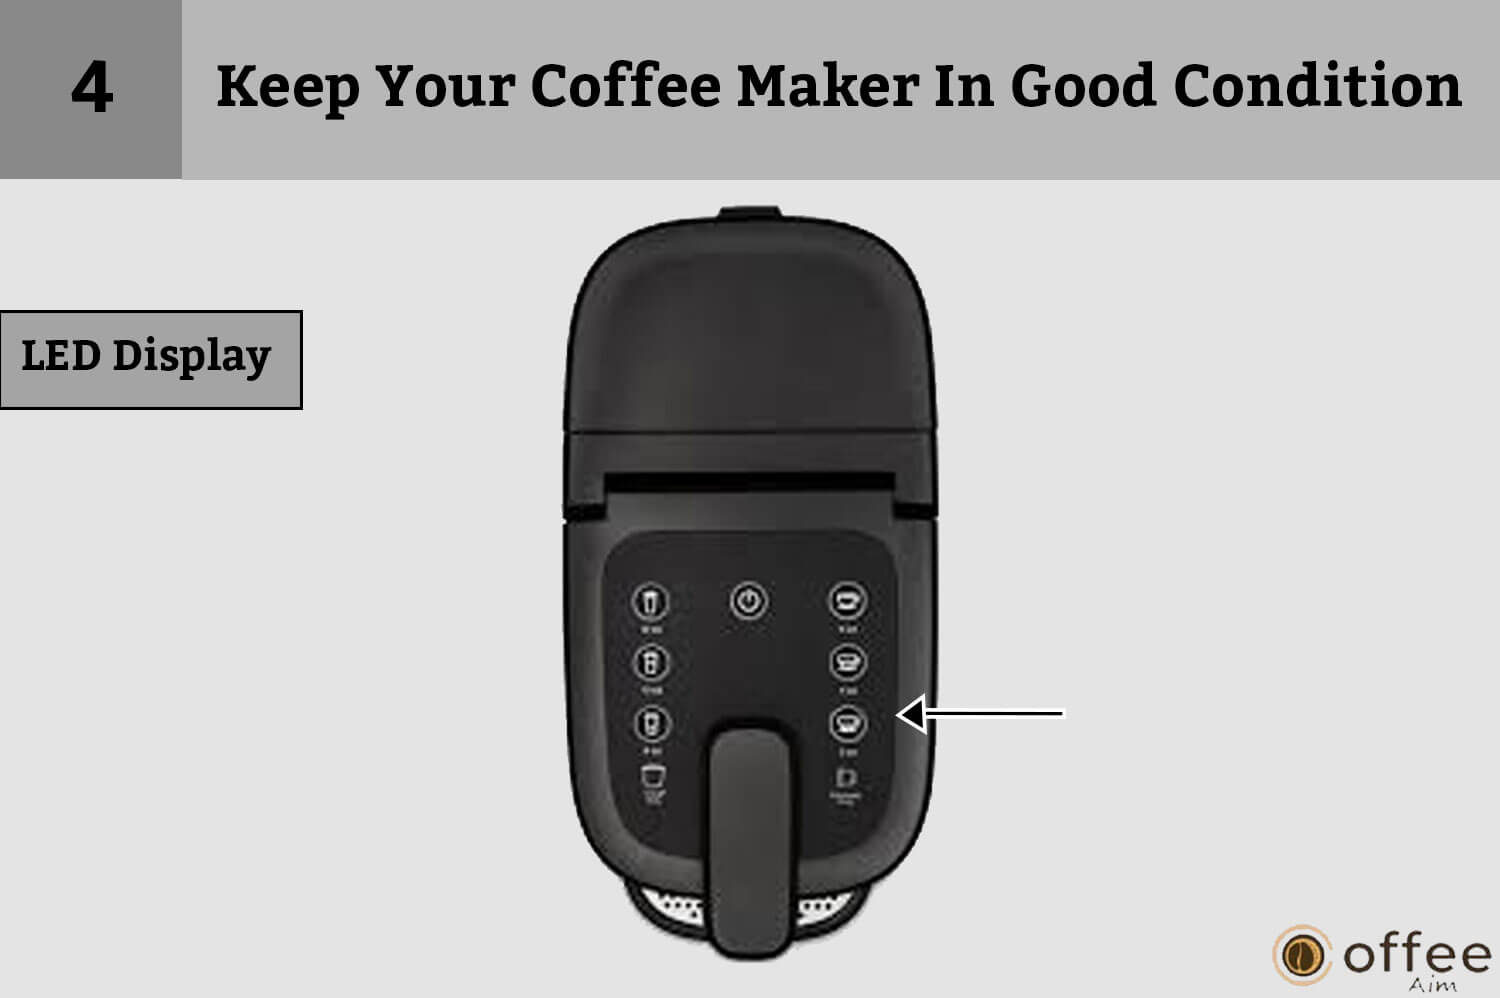 This image provides a visual representation of the "LED Display" as discussed in the article "How to Connect Nespresso Vertuo Creatista Machine: Keeping Your Coffee Maker in Good Condition."